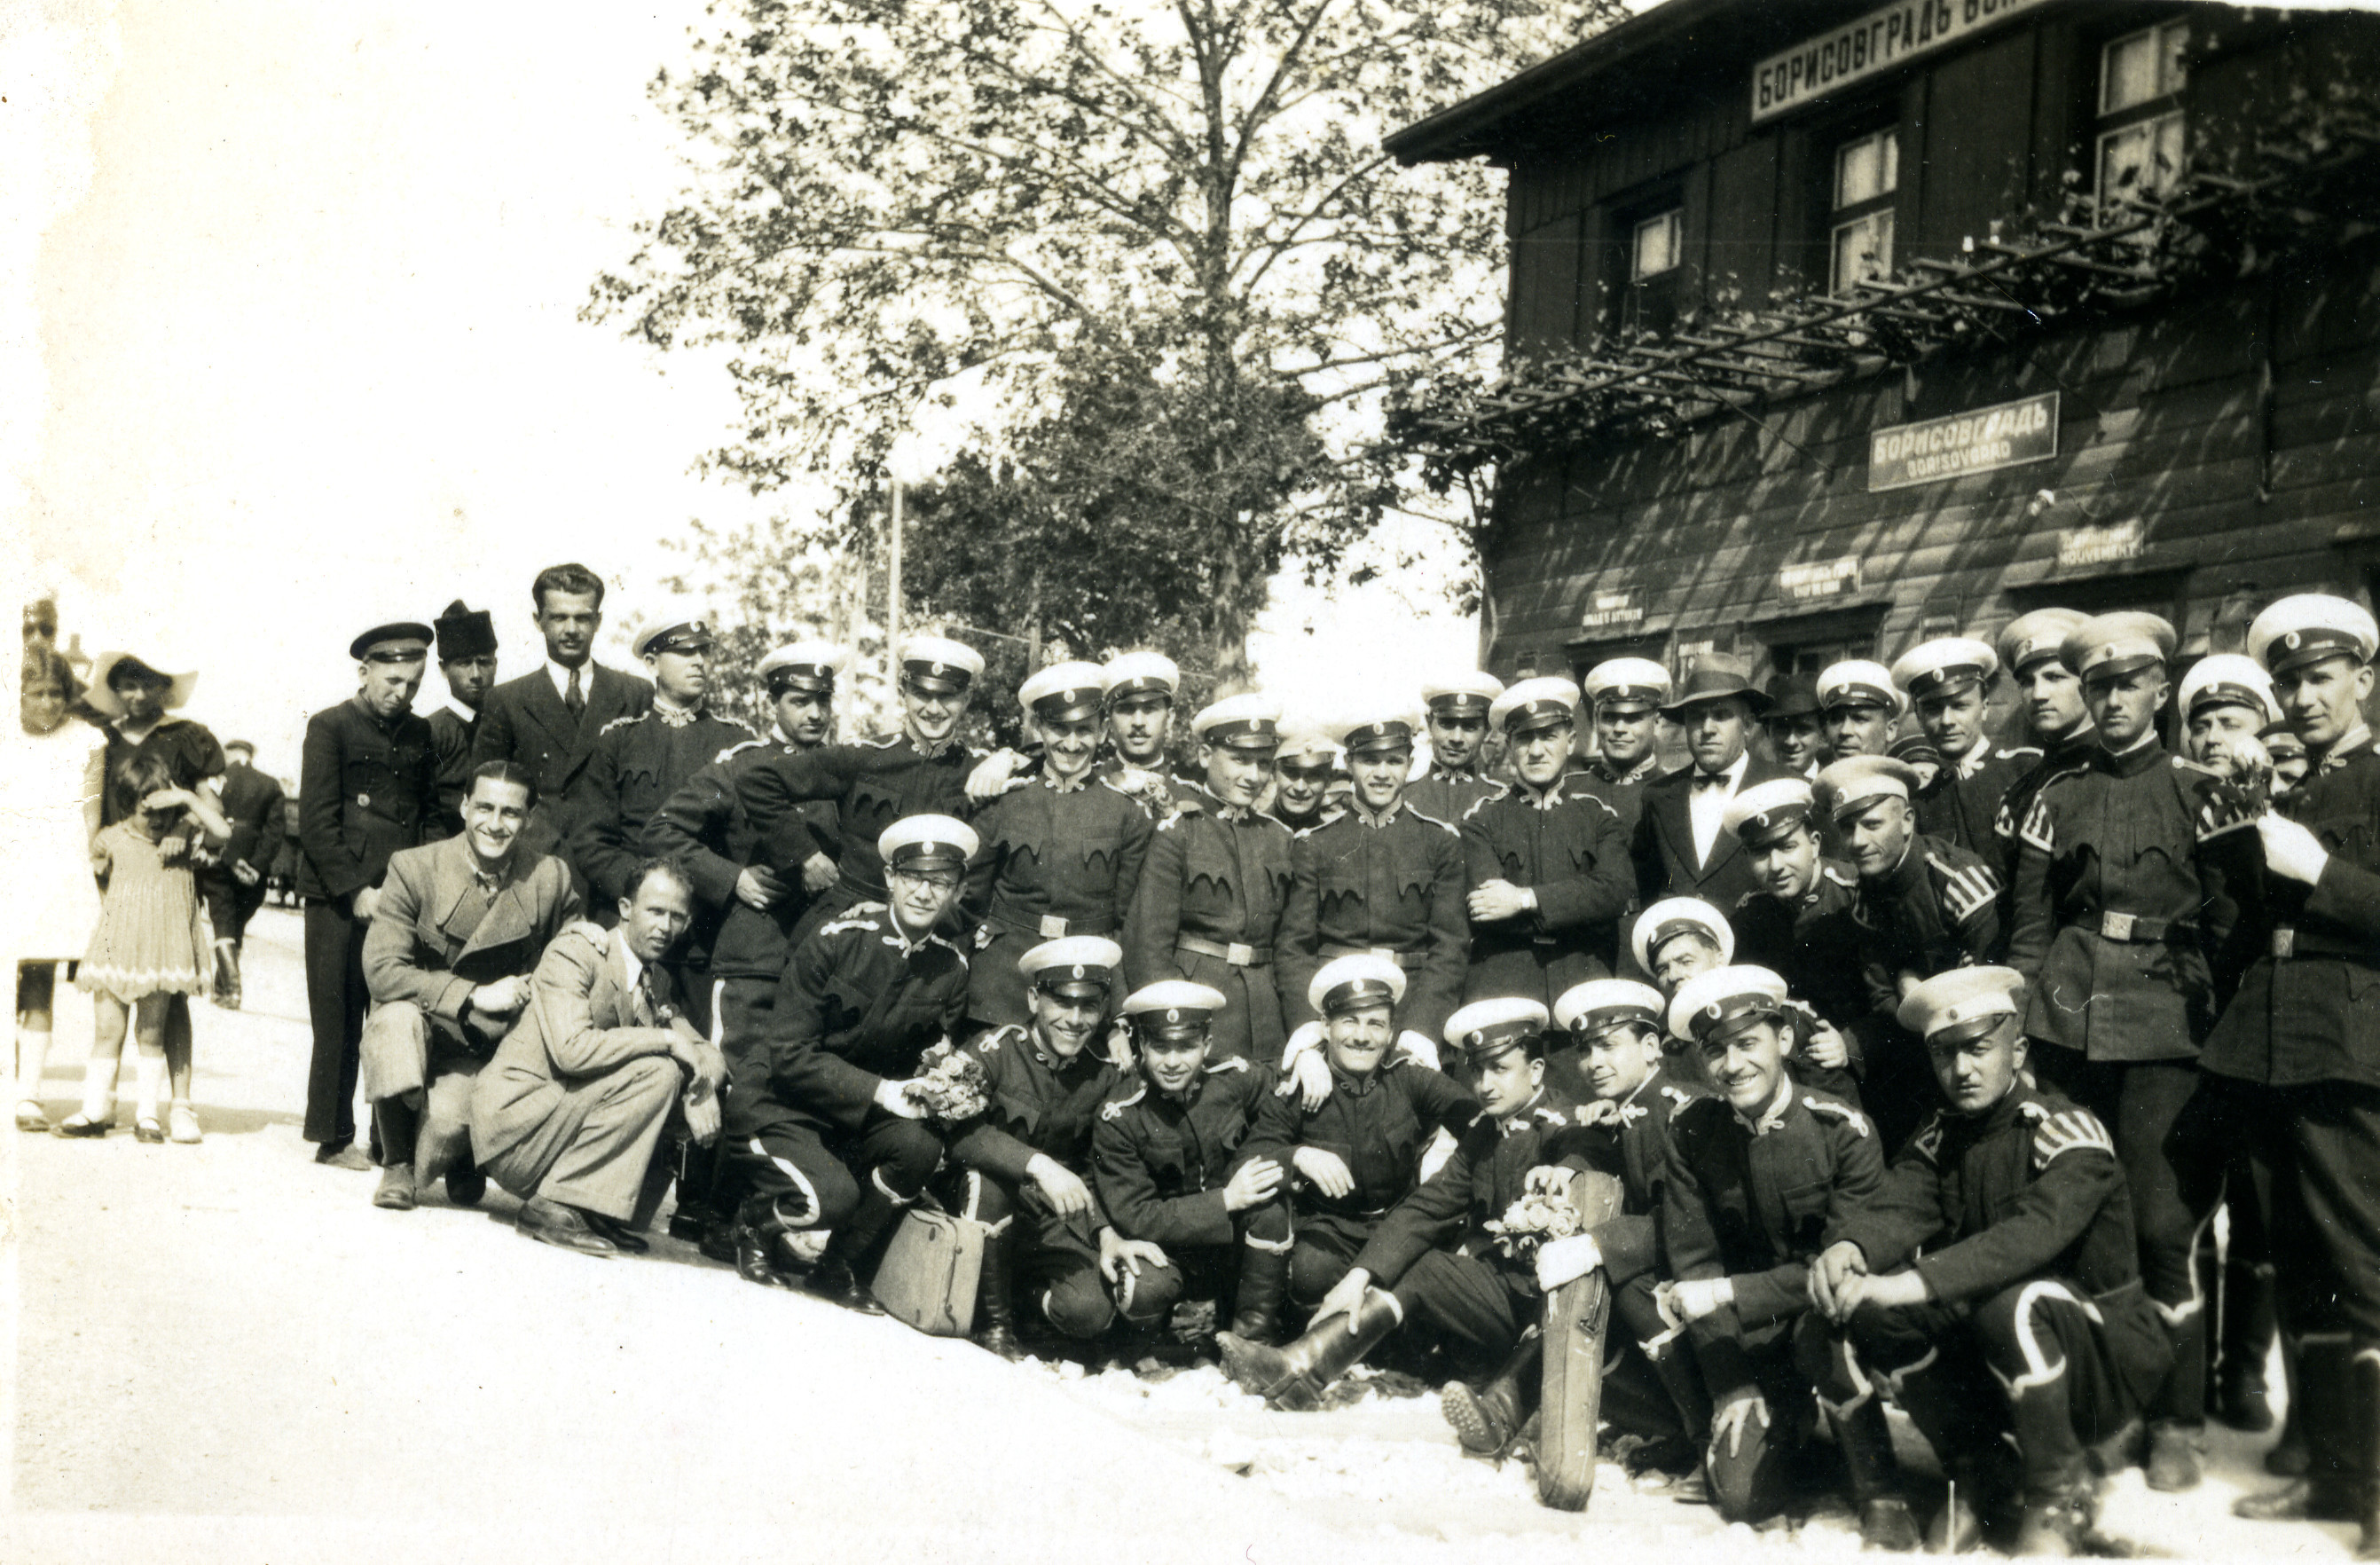 Group portrait of musicians in the Tsar's orchestra in Borisovgrad, Bulgaria.

Among those pictured is Nissim Alkalay (standing center-right, to the left of the man wearing a suit).